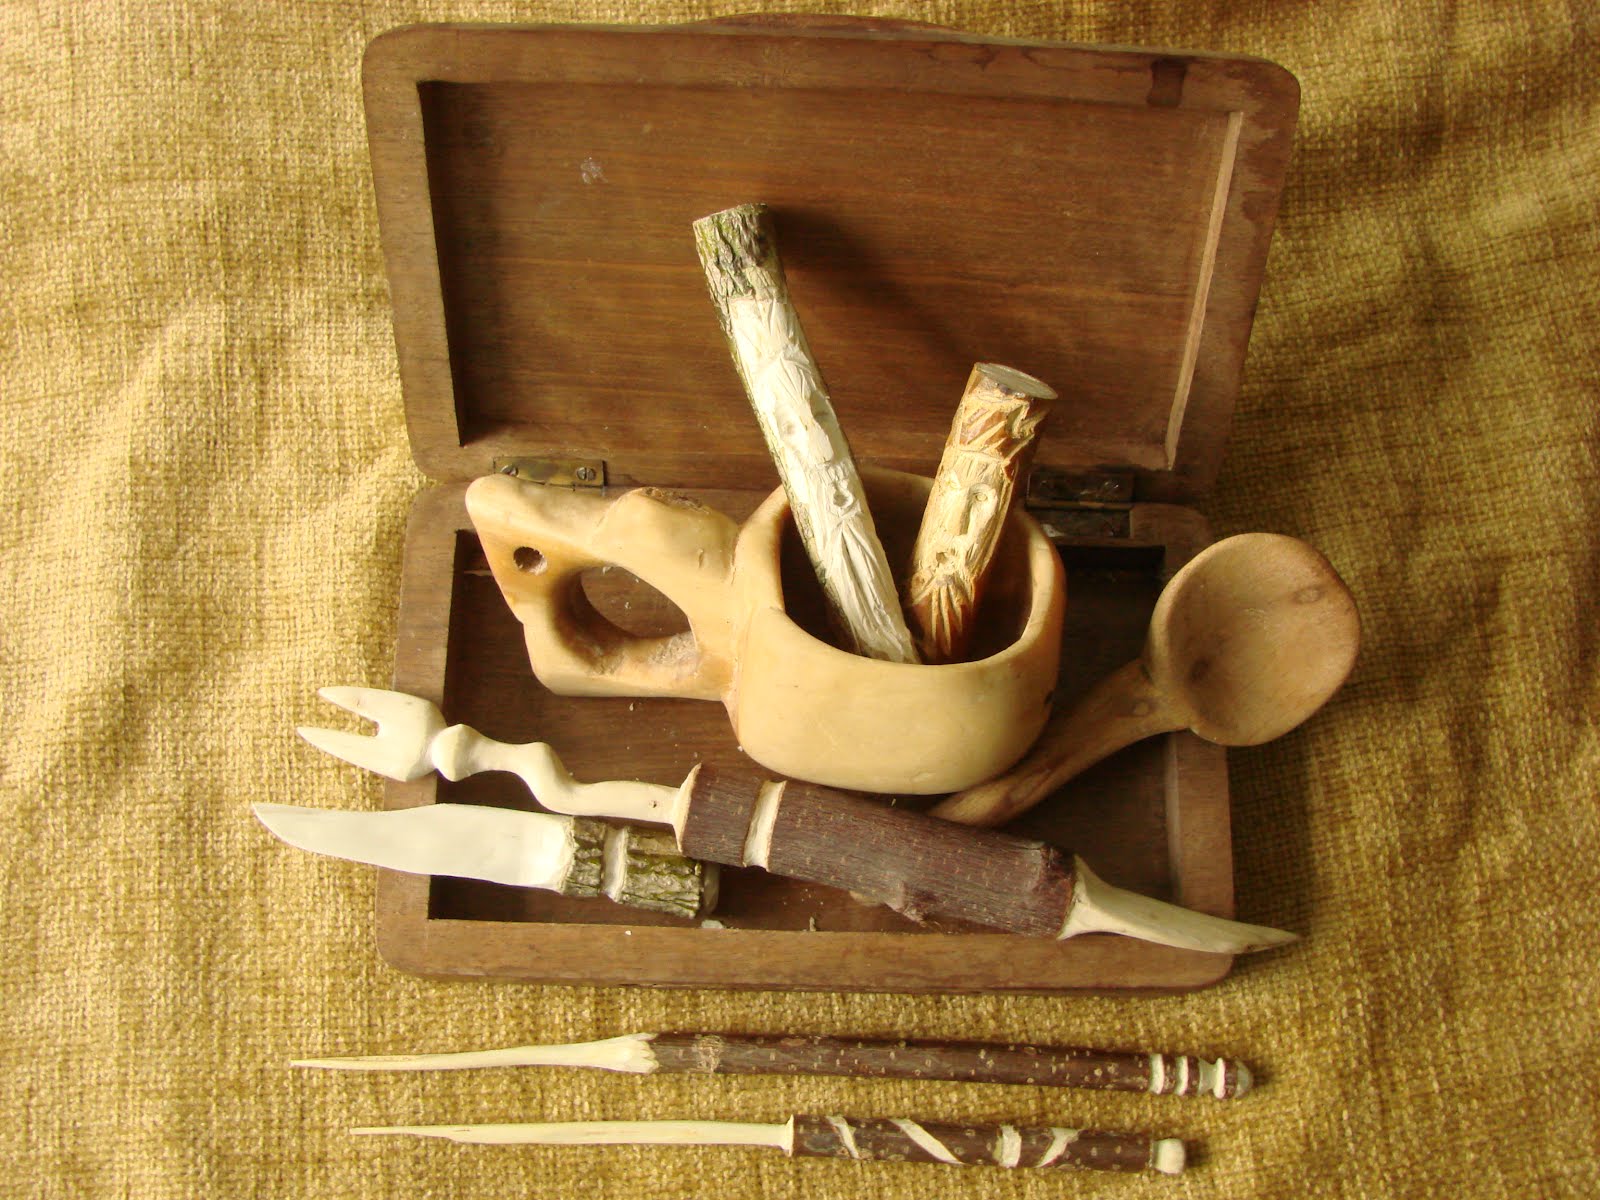 Wood Project: Easy wood whittling projects